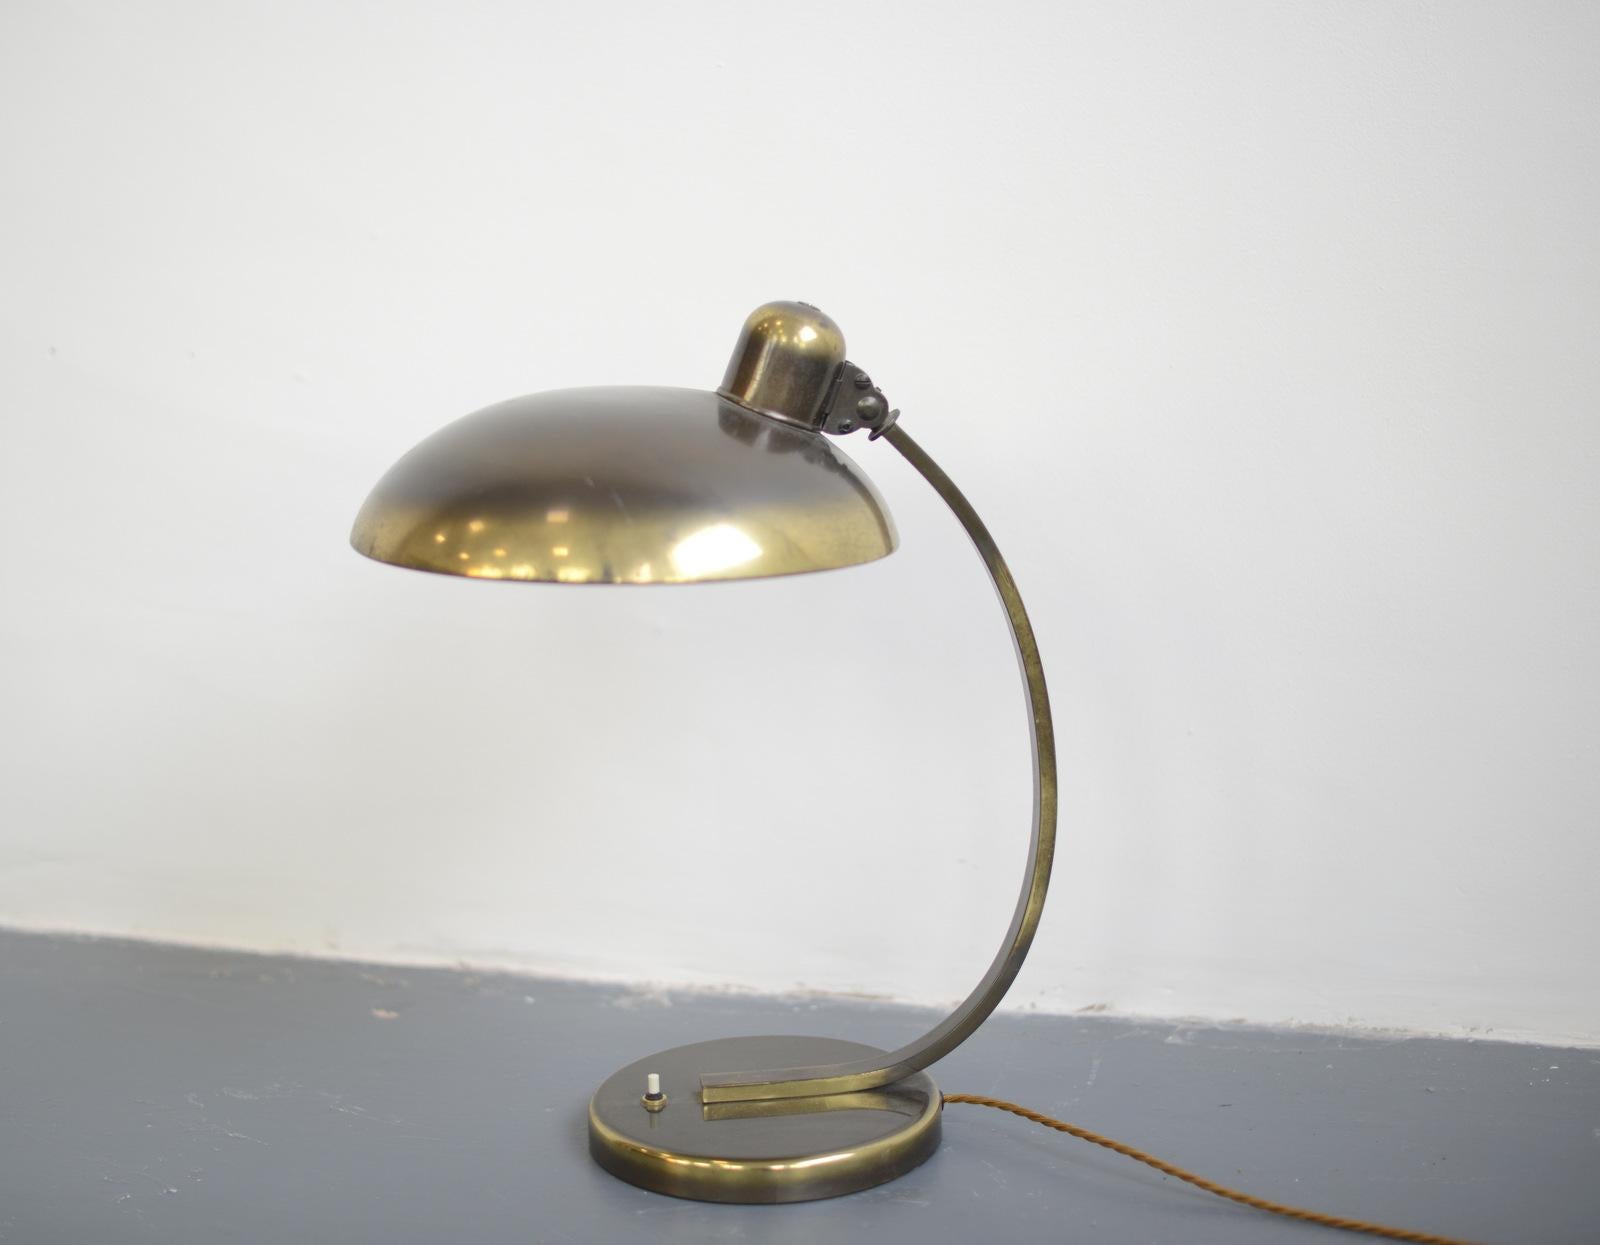 Kaiser Idell Model 6750, circa 1930s

- Brass shade, arm and base
- Takes E27 fitting bulbs
- On/Off switch on the base
- German ~ 1930s
- 36 cm wide x 46 cm tall x 26 cm deep

Christian Dell

Dell was born in Offenbach am Main in Hesse.